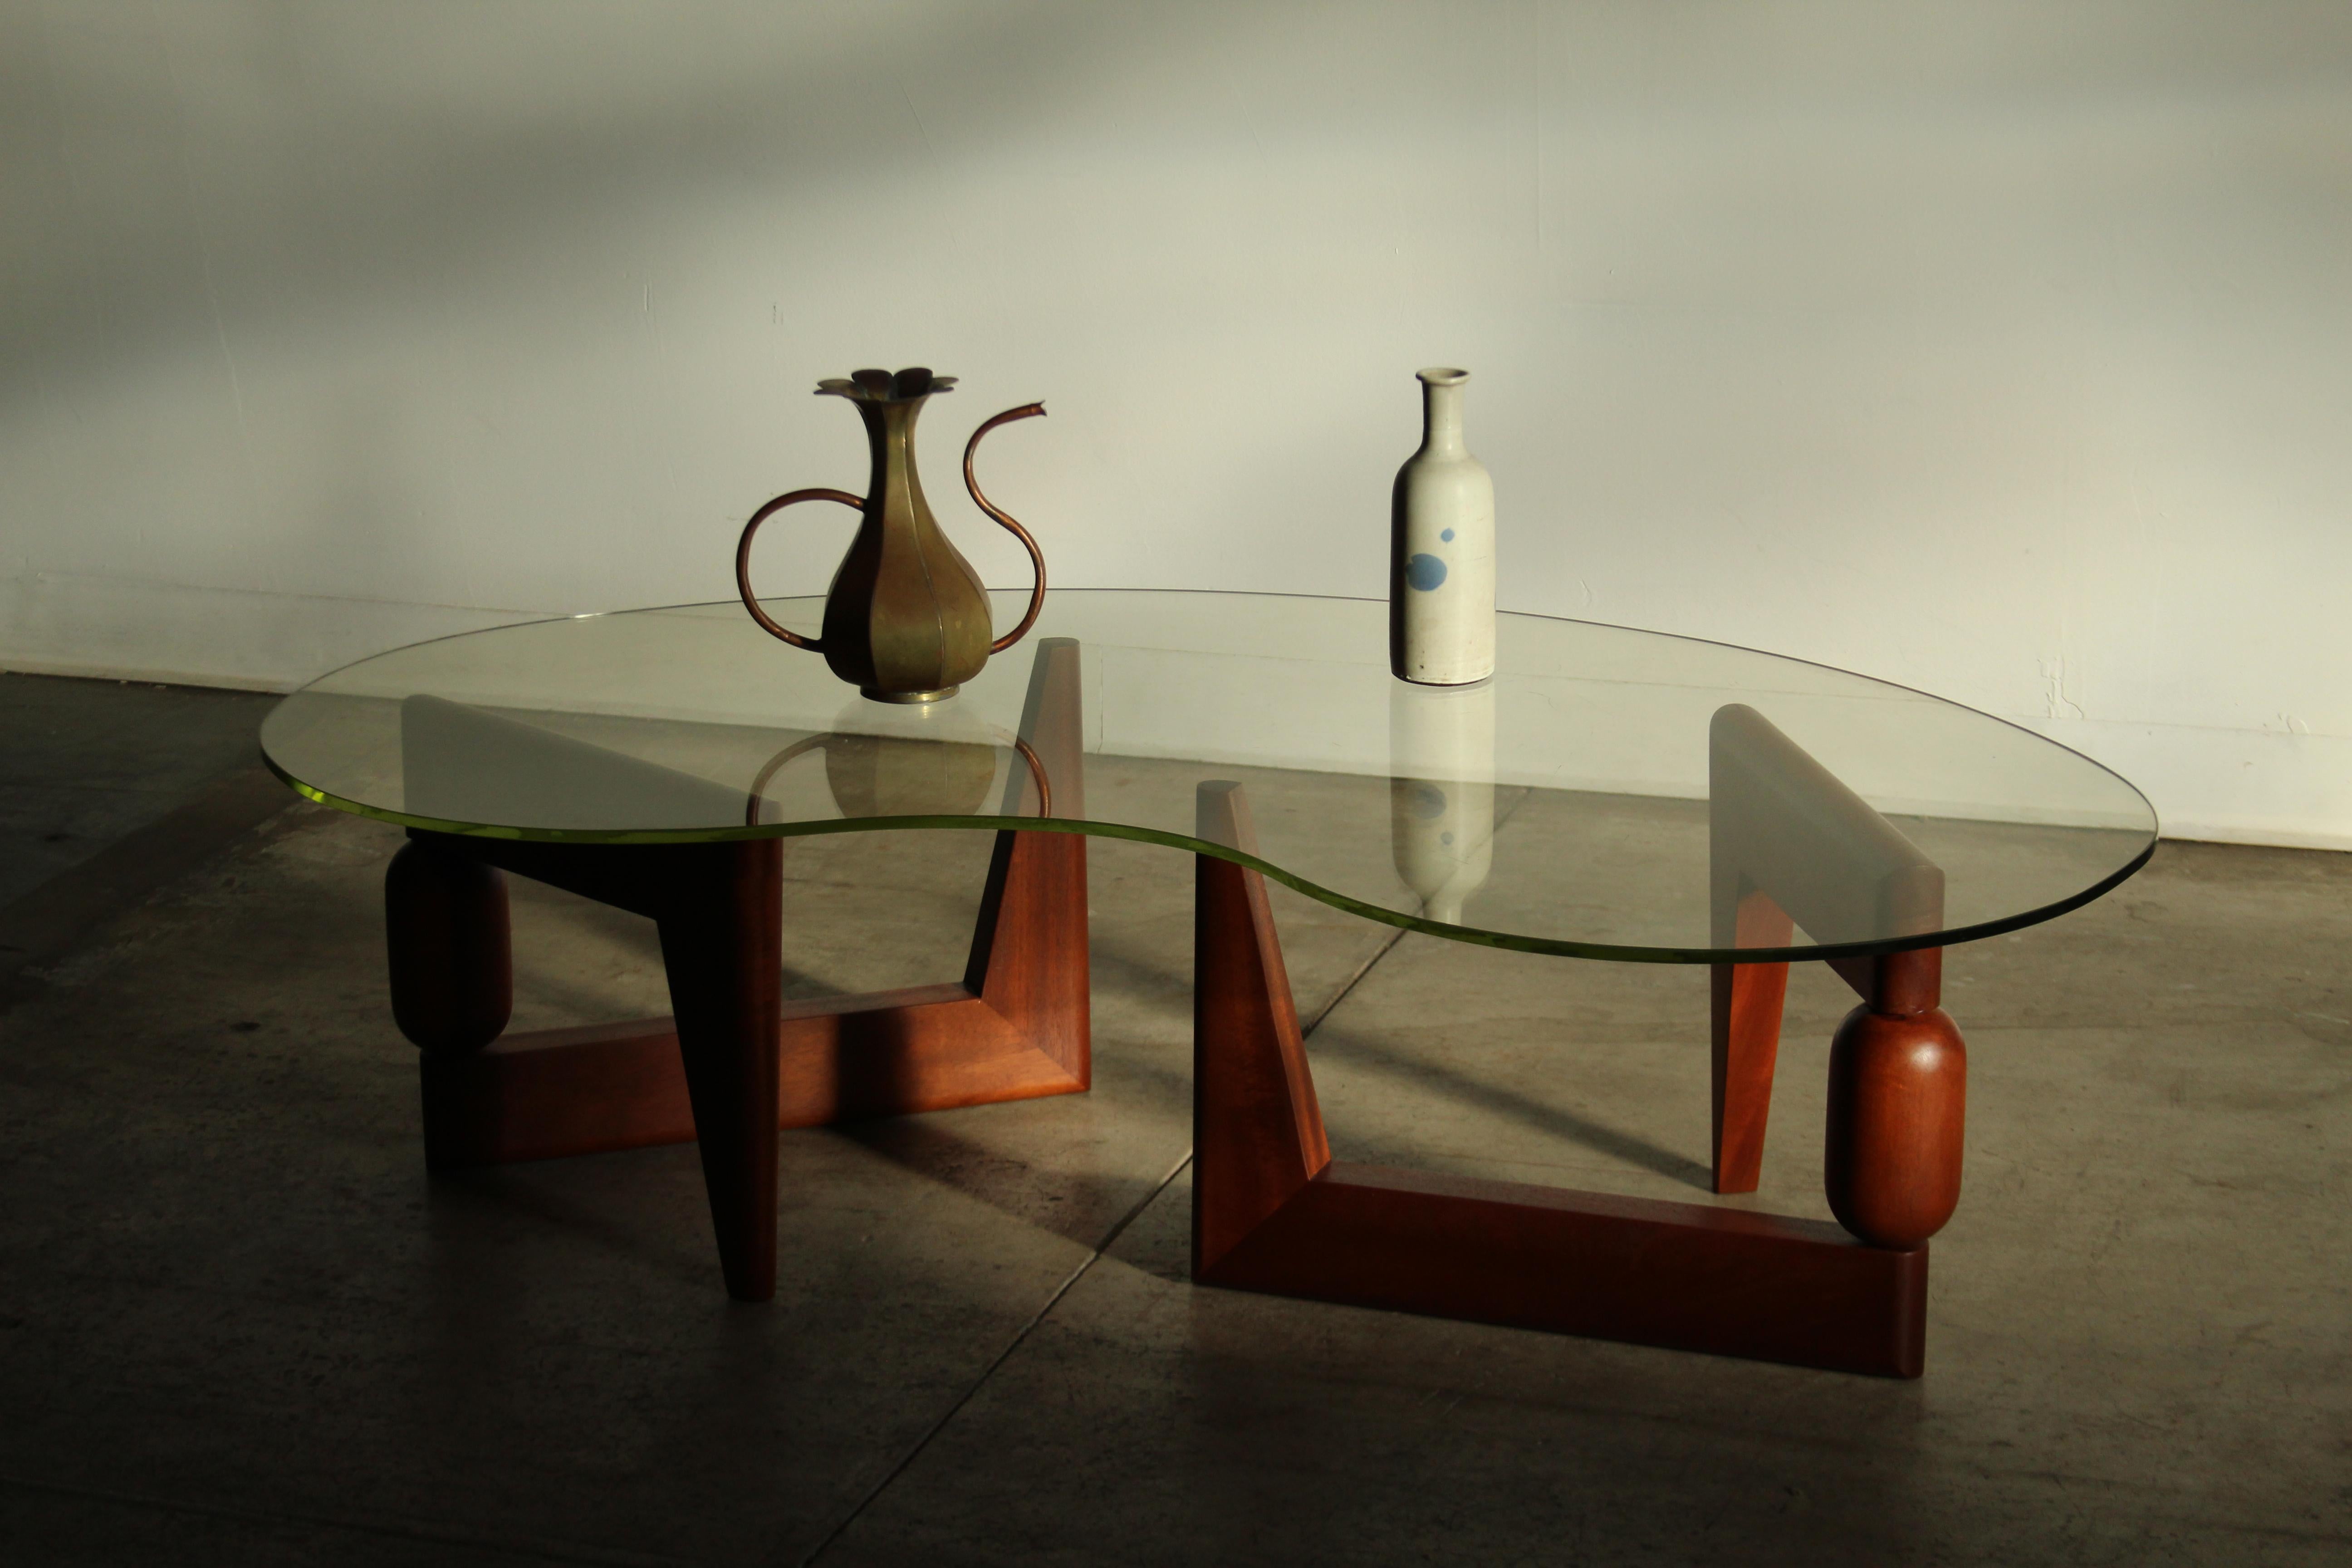 Sculptural Freeform Coffee Table in the Manner of Isamu Noguchi, 1970s For Sale 9